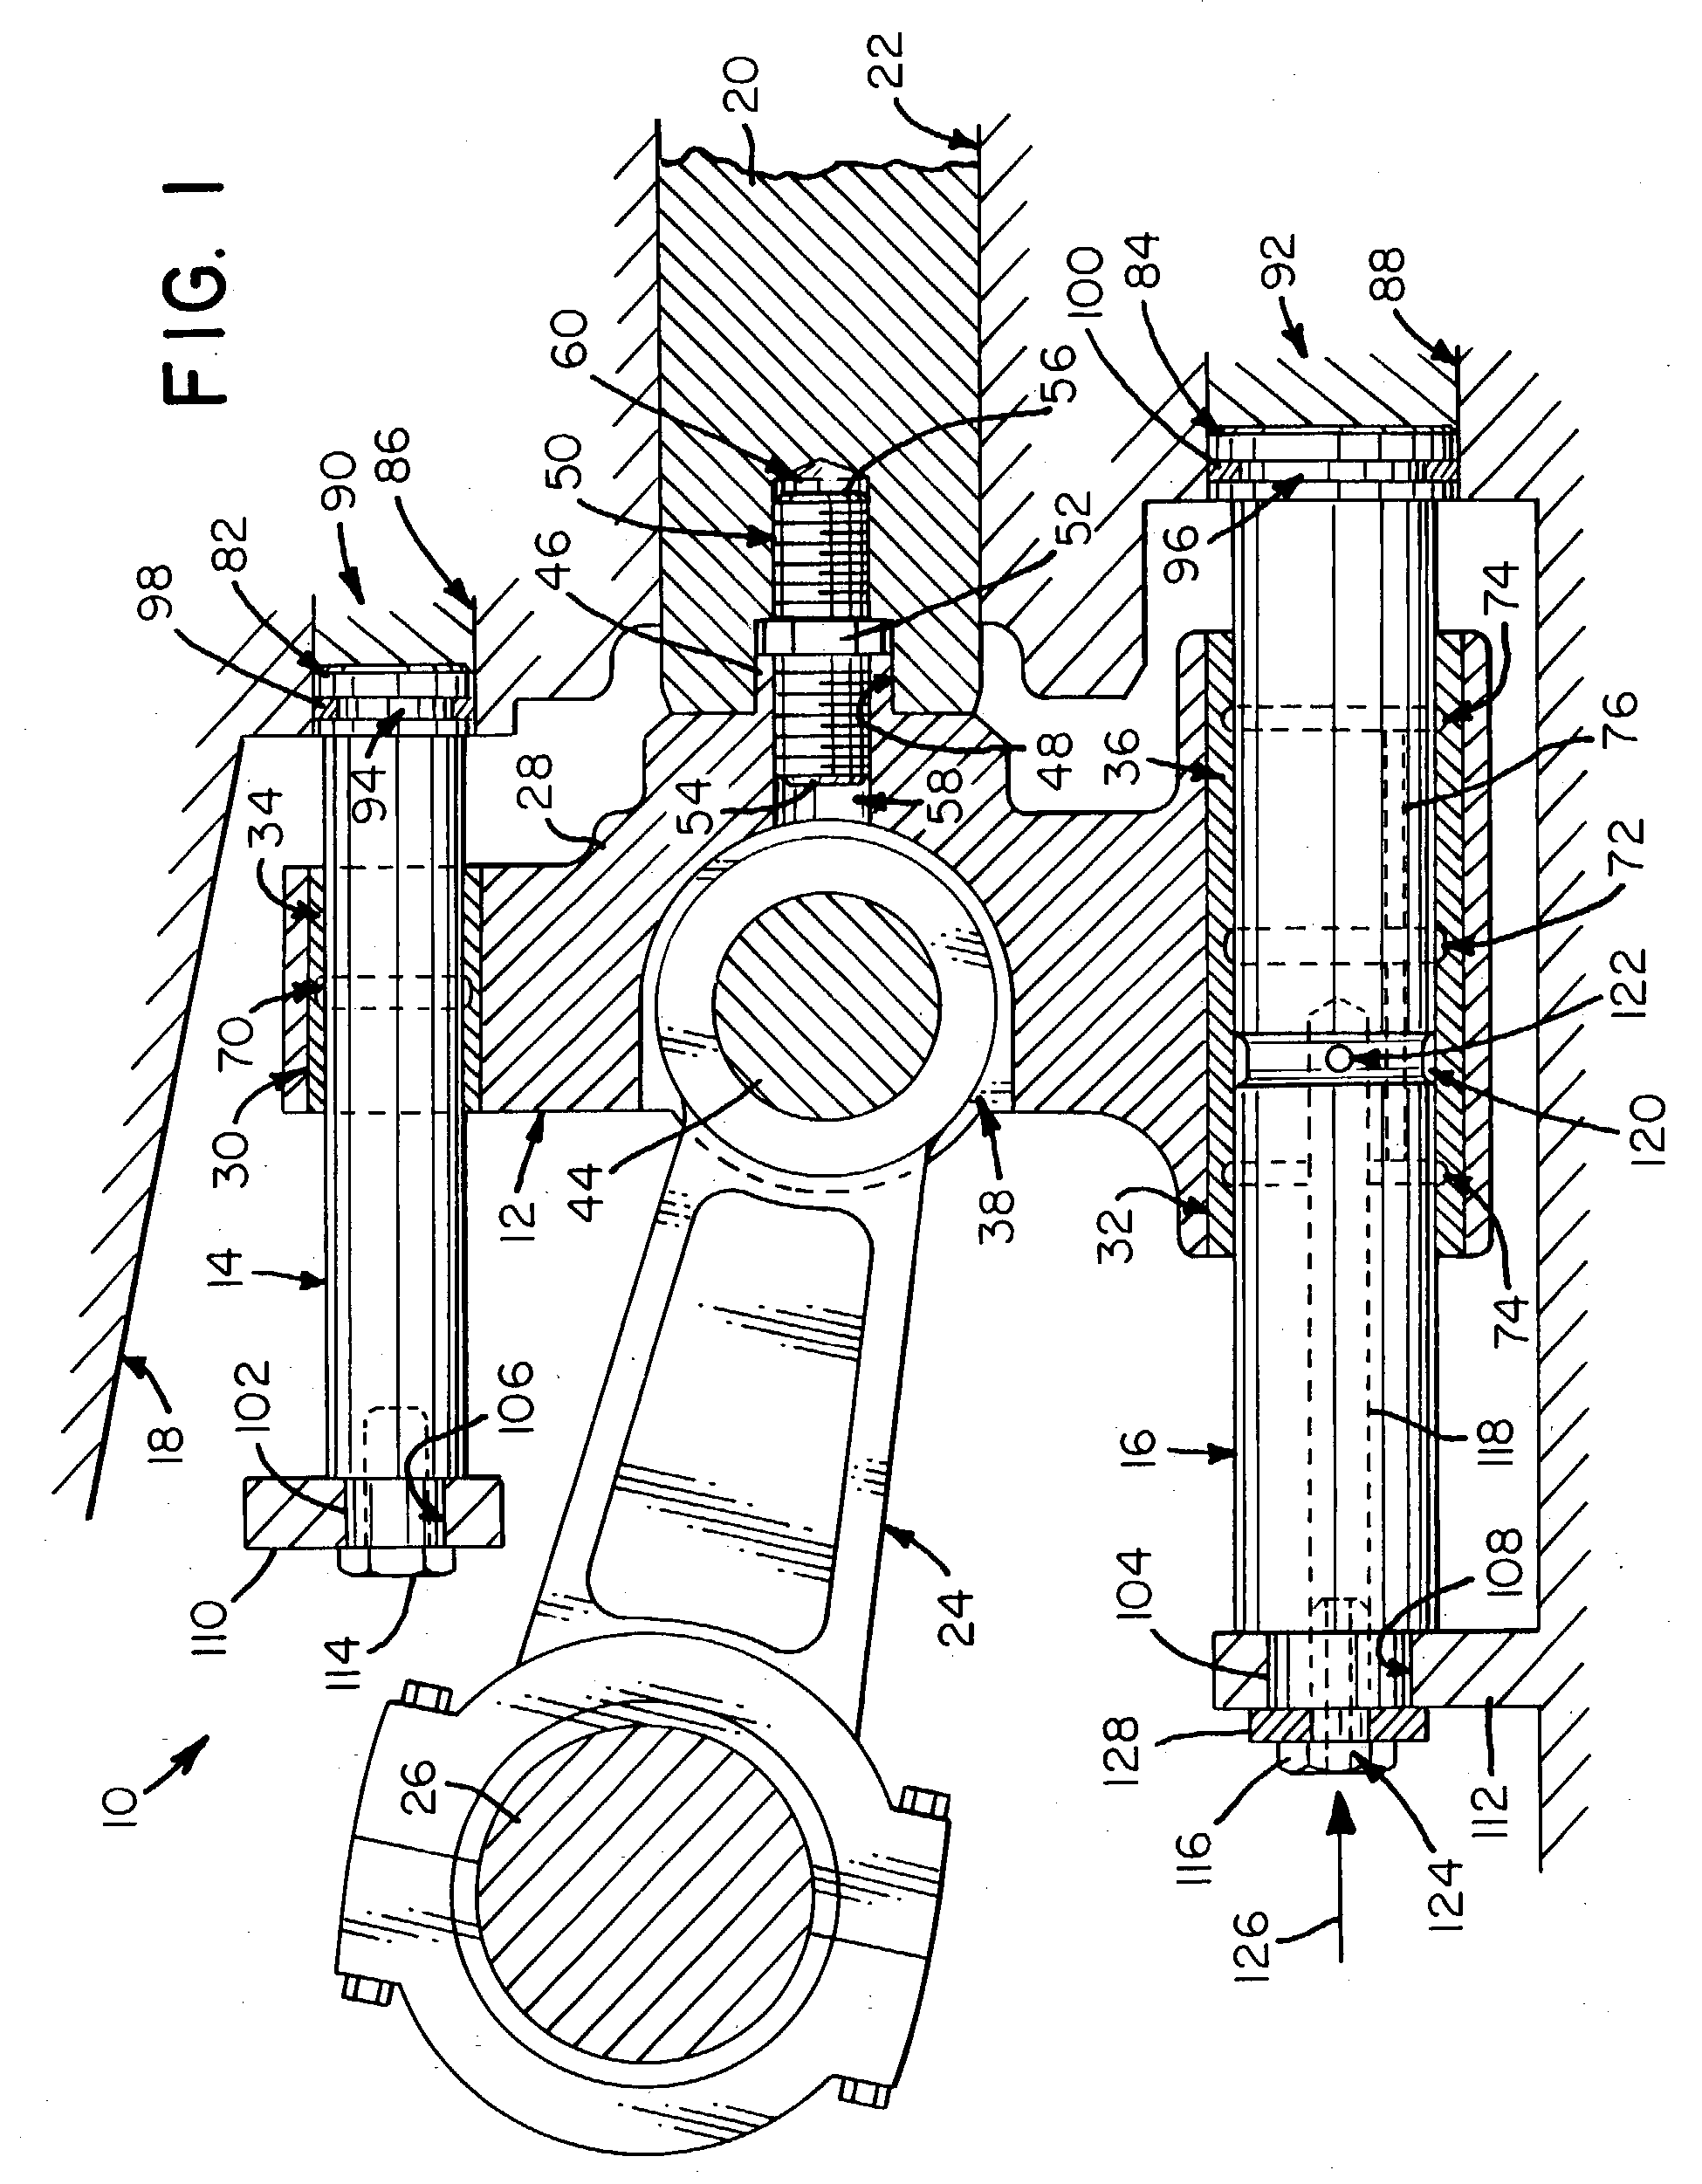 Rod-guided crosshead assembly